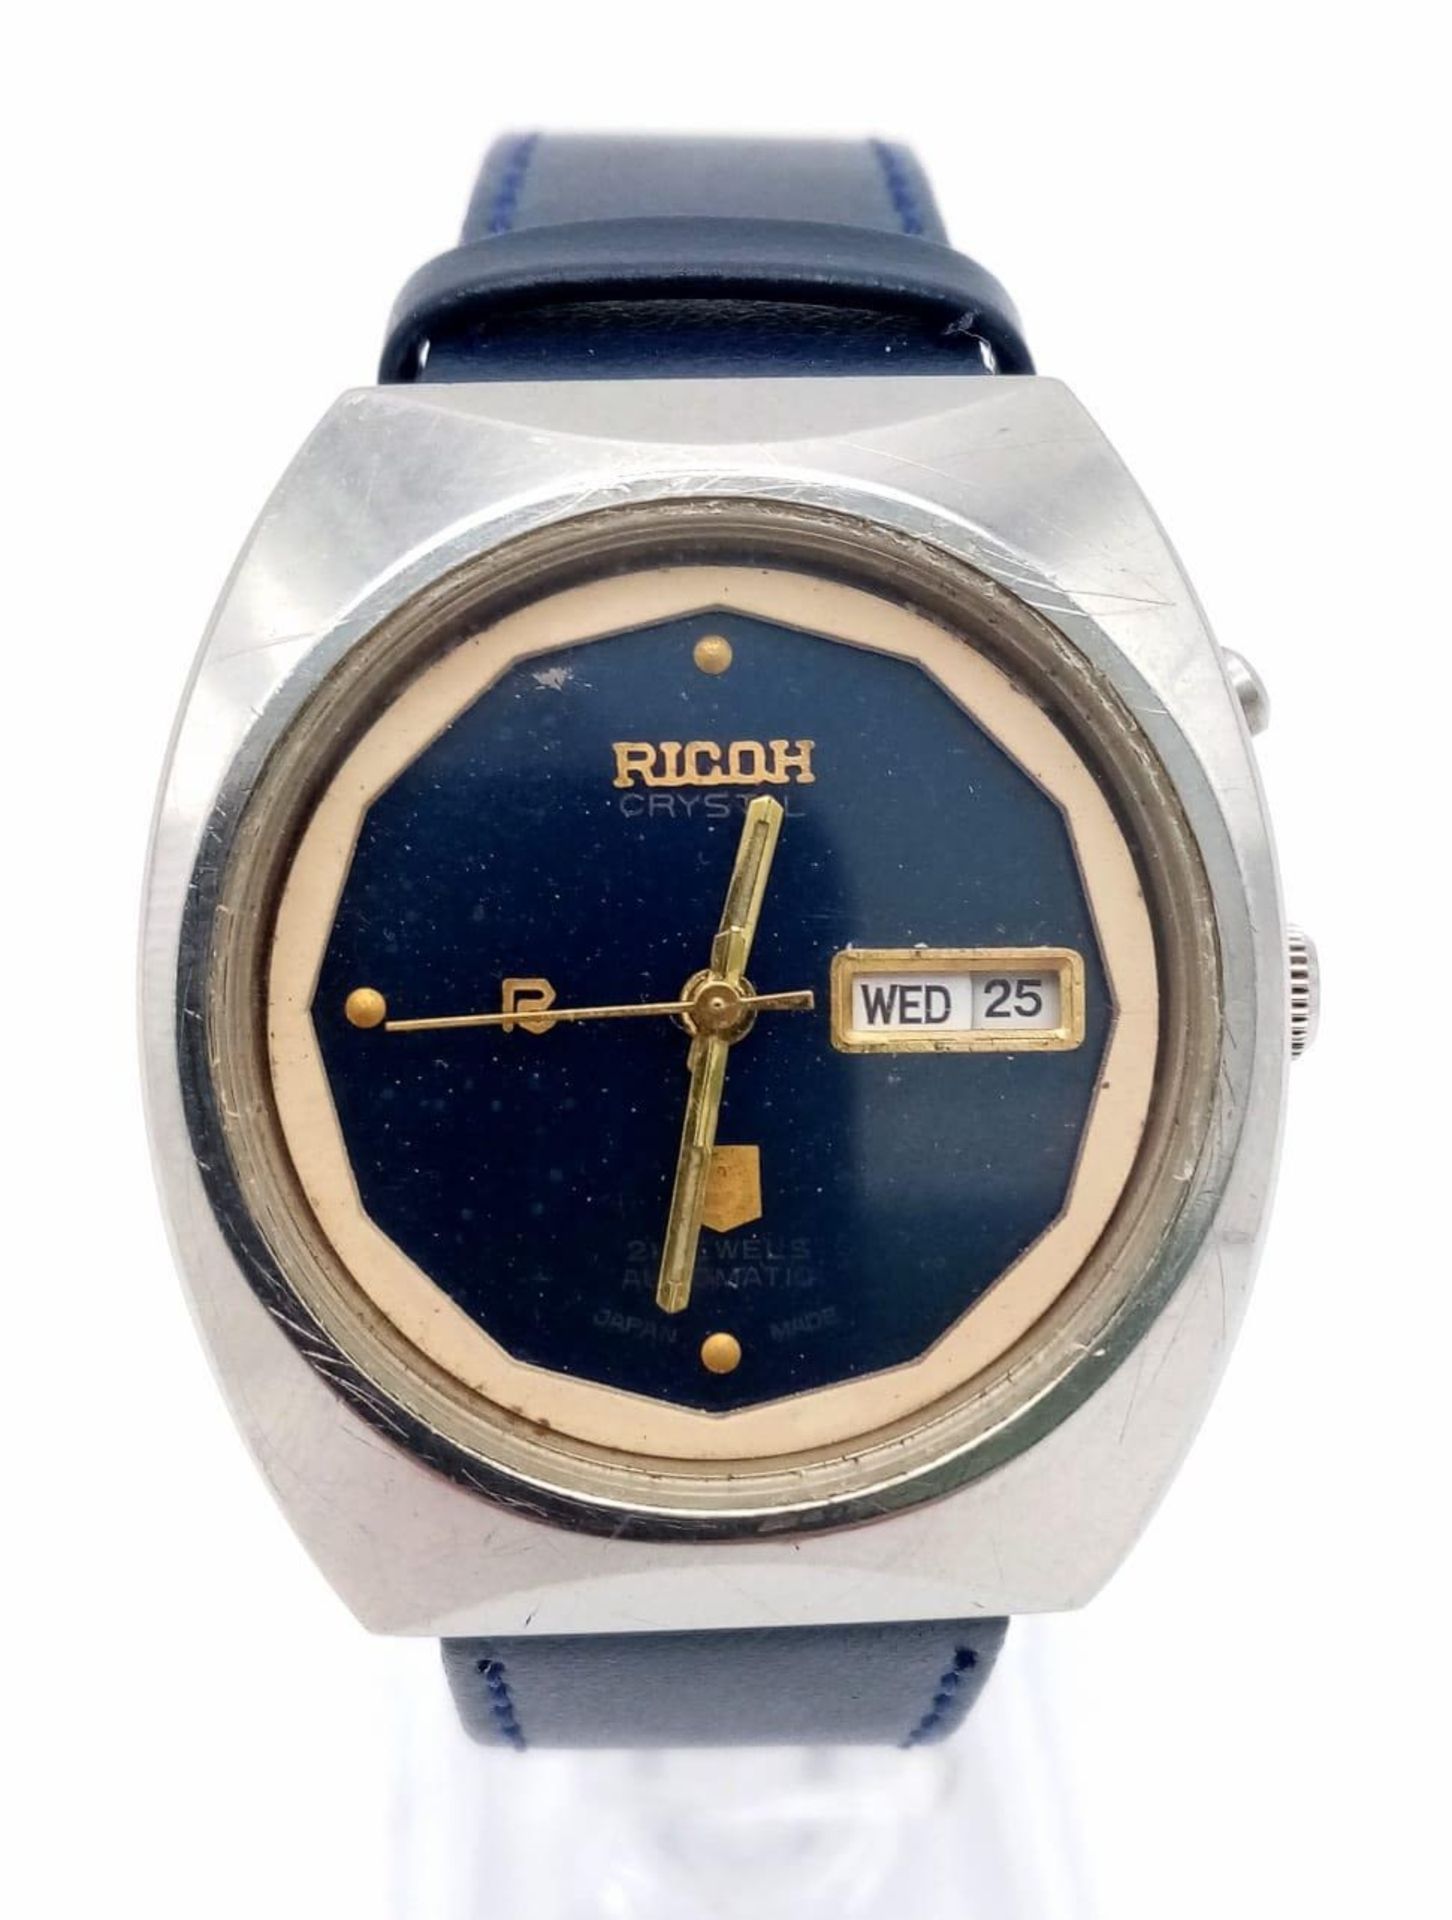 A Vintage Ricoh Automatic Gents Watch. Blue leather strap. Stainless steel case - 37mm. Blue dial - Image 5 of 12